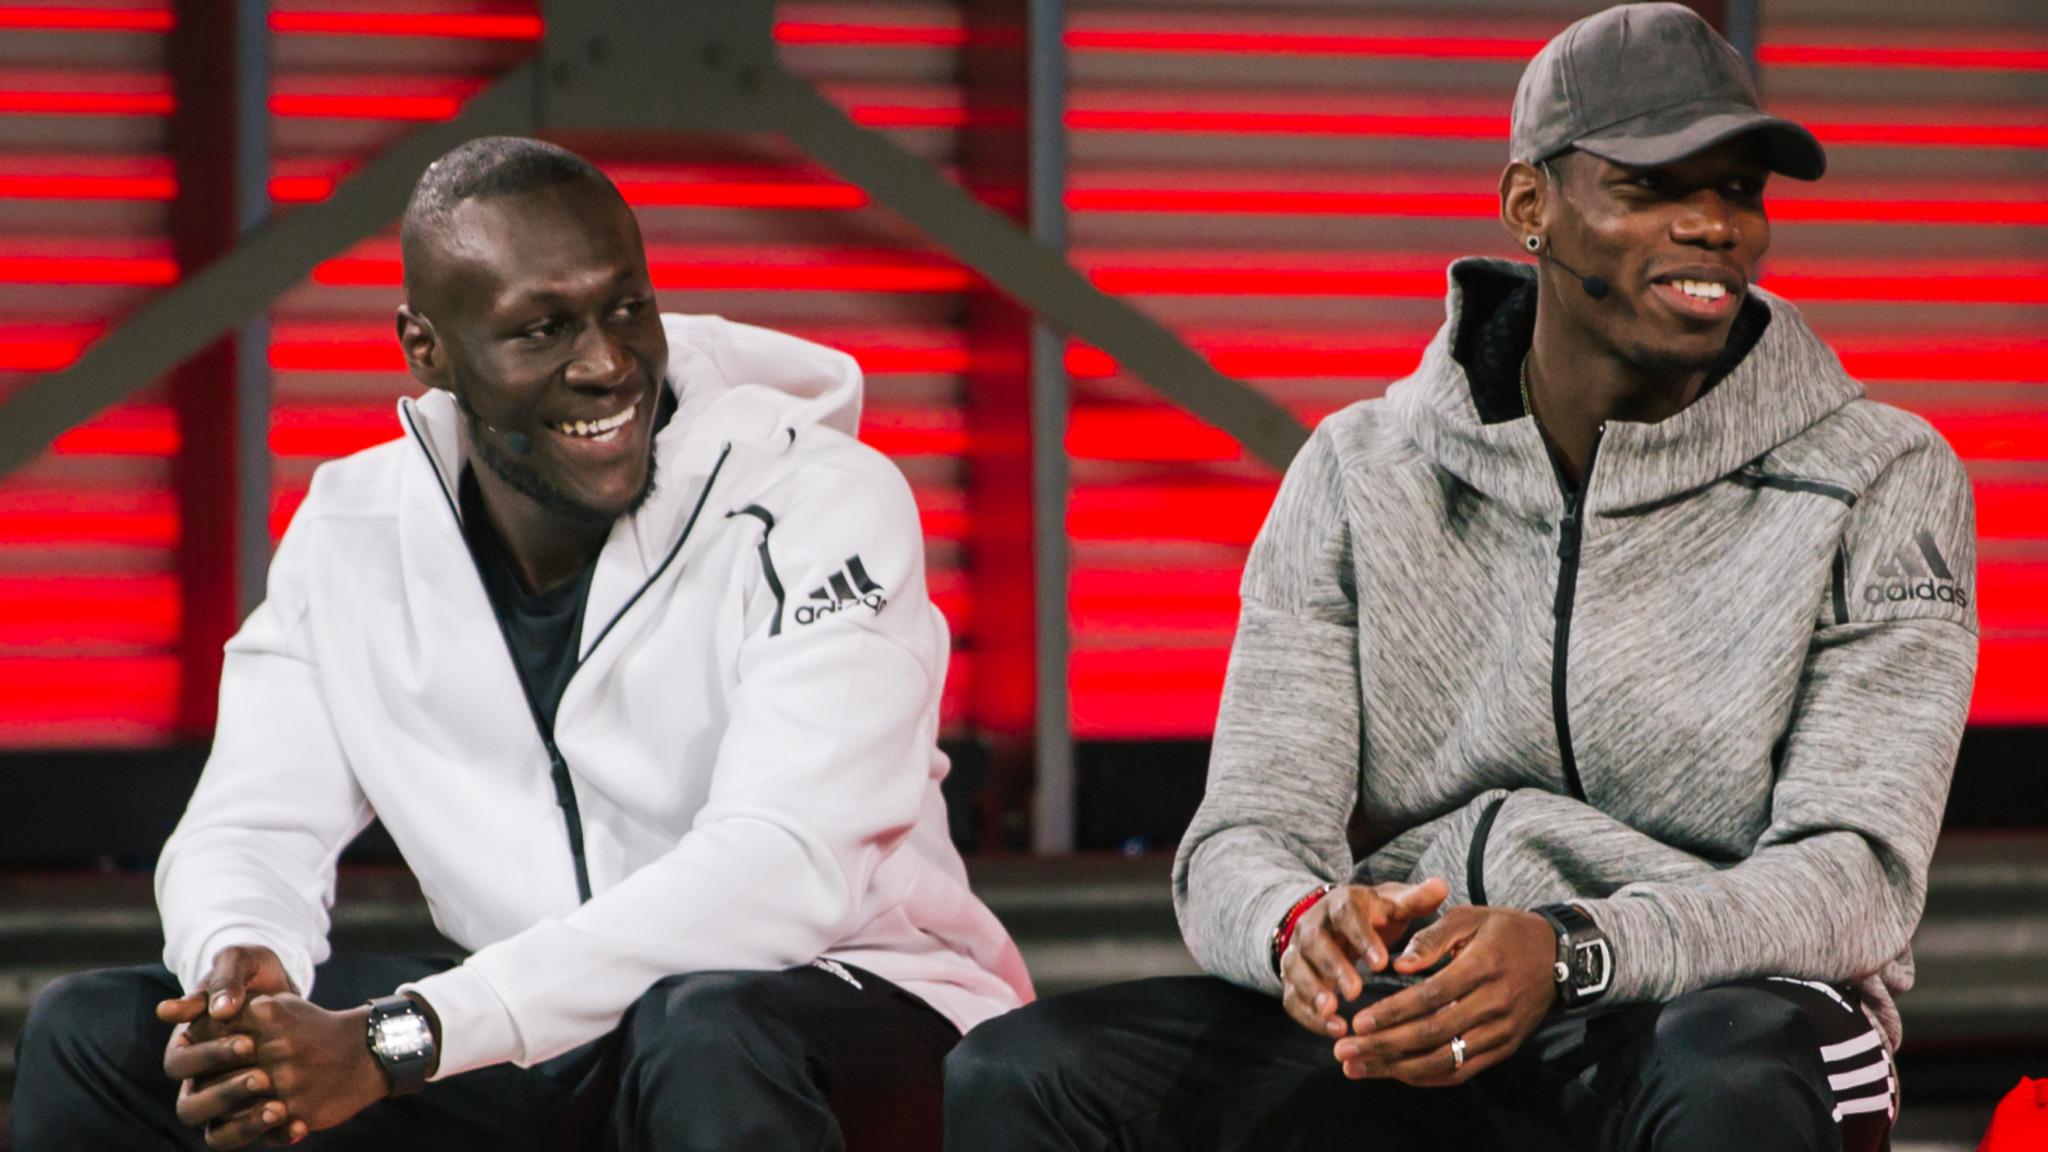 Stormzy reveals he had to keep Paul Pogba signing for Man Utd a